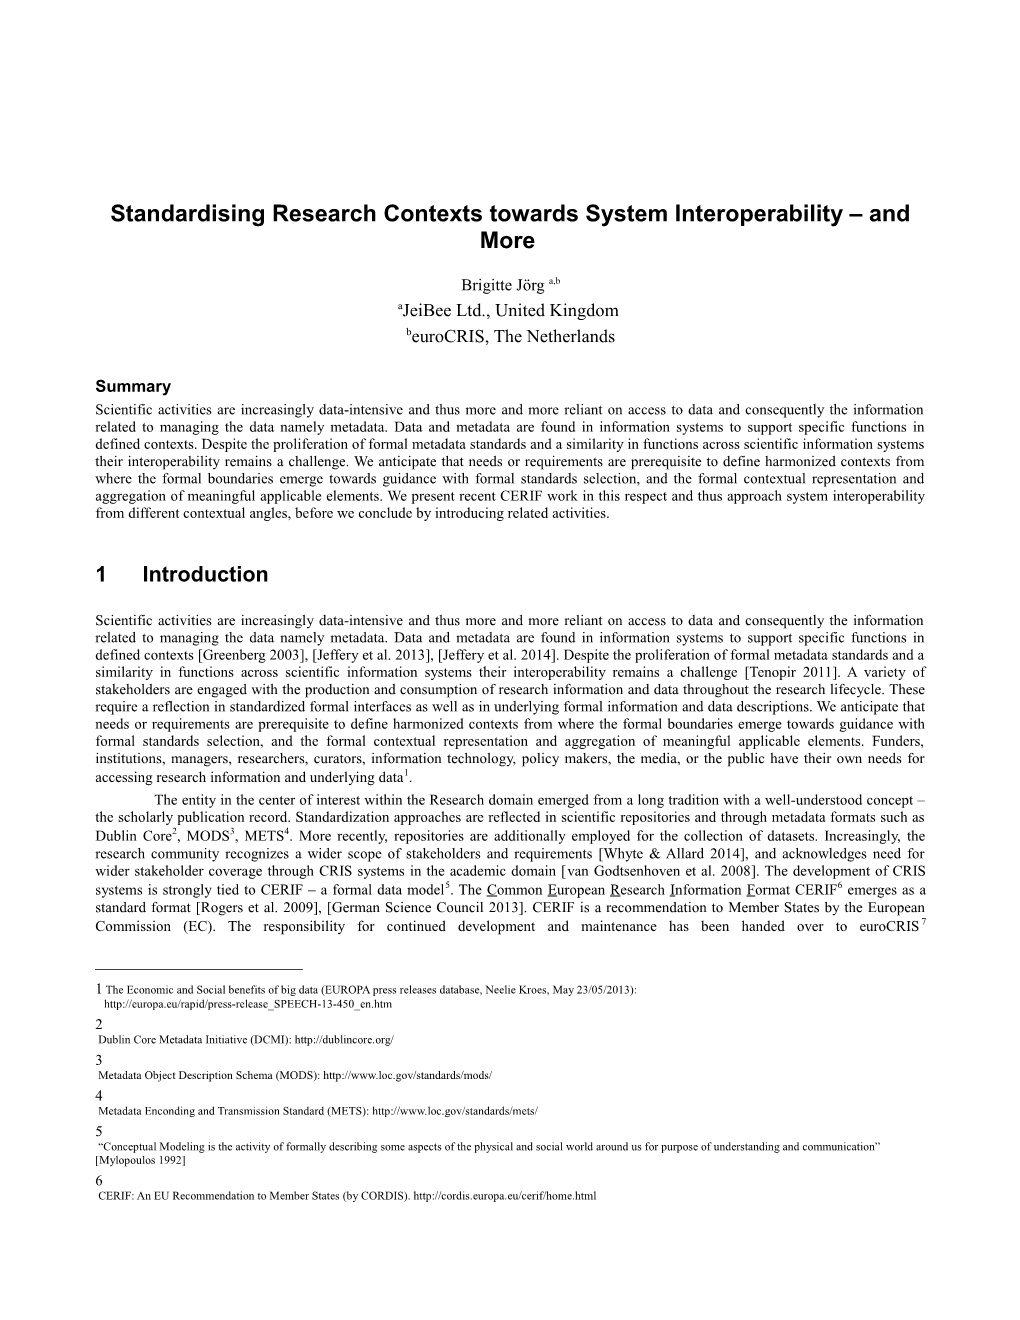 Standardising Research Contexts Towards System Interoperability and More